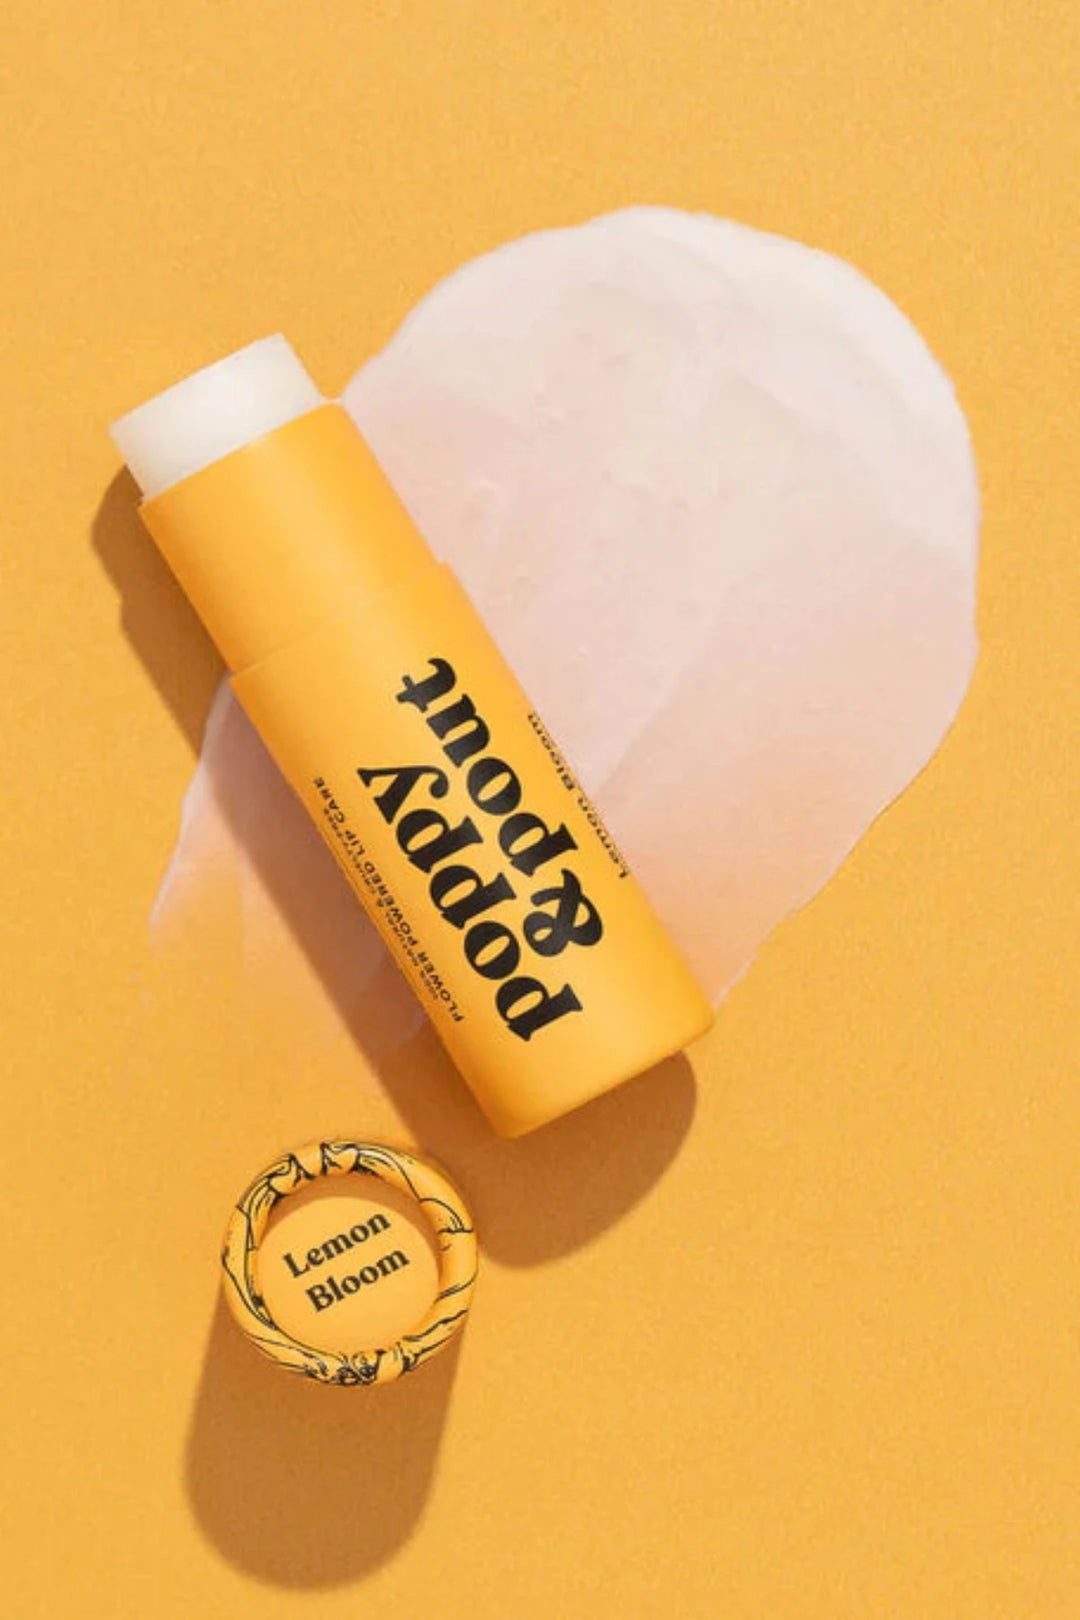 A fresh squeeze of lemon refreshes even the dreariest day! Get your zest on with clean and bright Lemon Bloom, a Poppy & Pout favorite filled with our signature clean & natural ingredients.